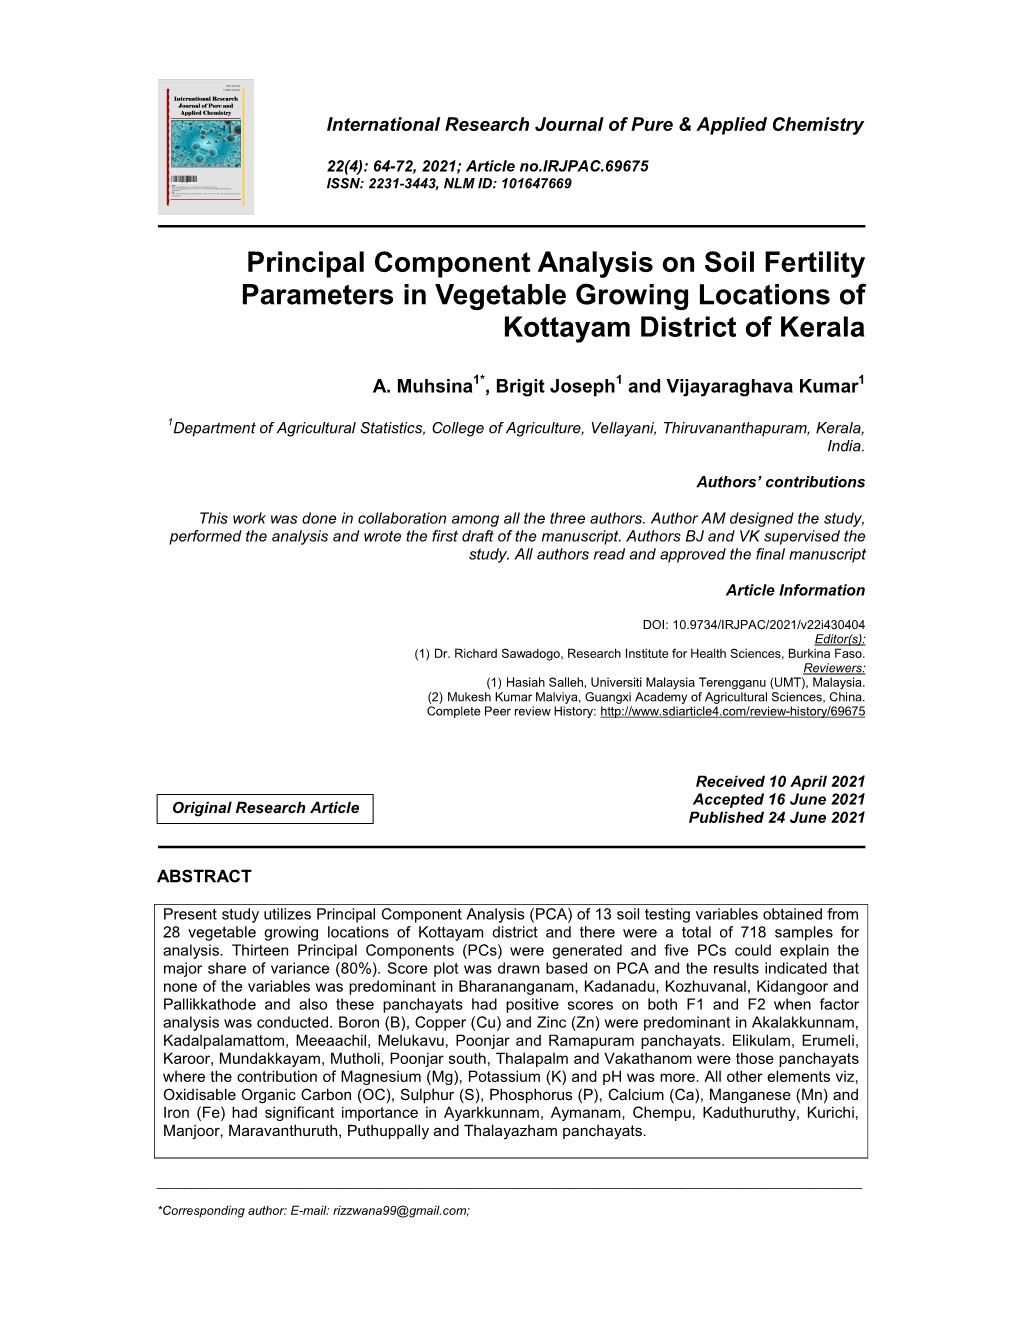 Principal Component Analysis on Soil Fertility Parameters in Vegetable Growing Locations of Kottayam District of Kerala